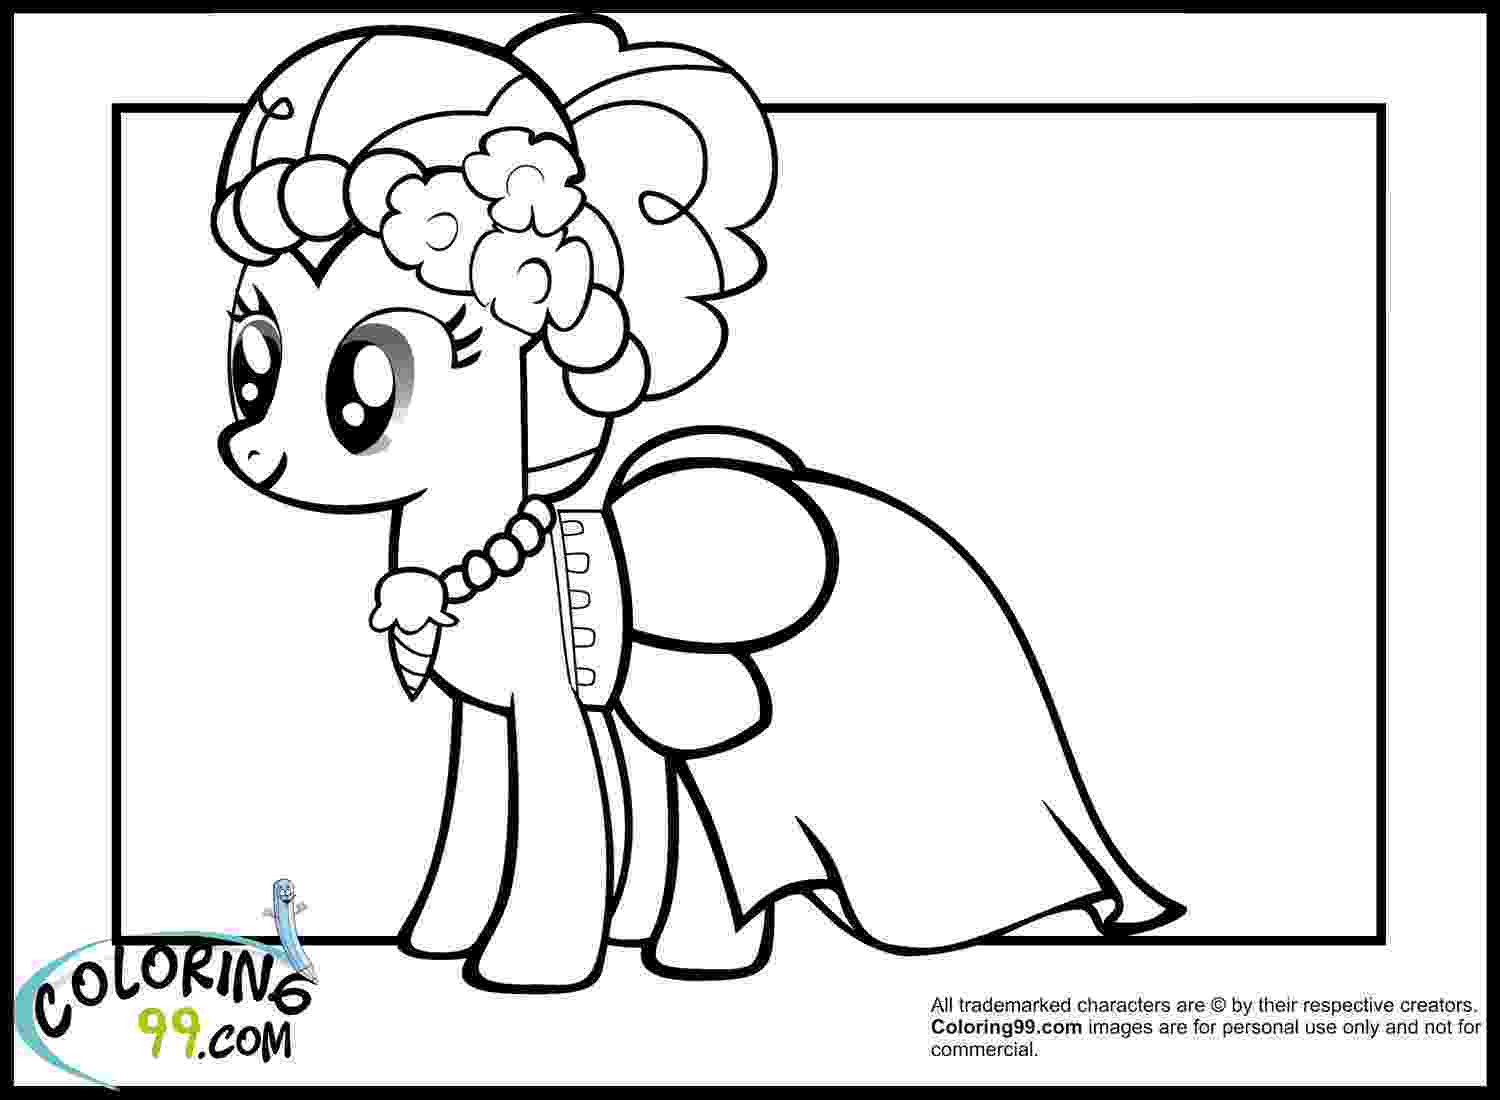 pinkie pie coloring pages my little pony pinkie pie coloring pages team colors coloring pages pinkie pie 1 1